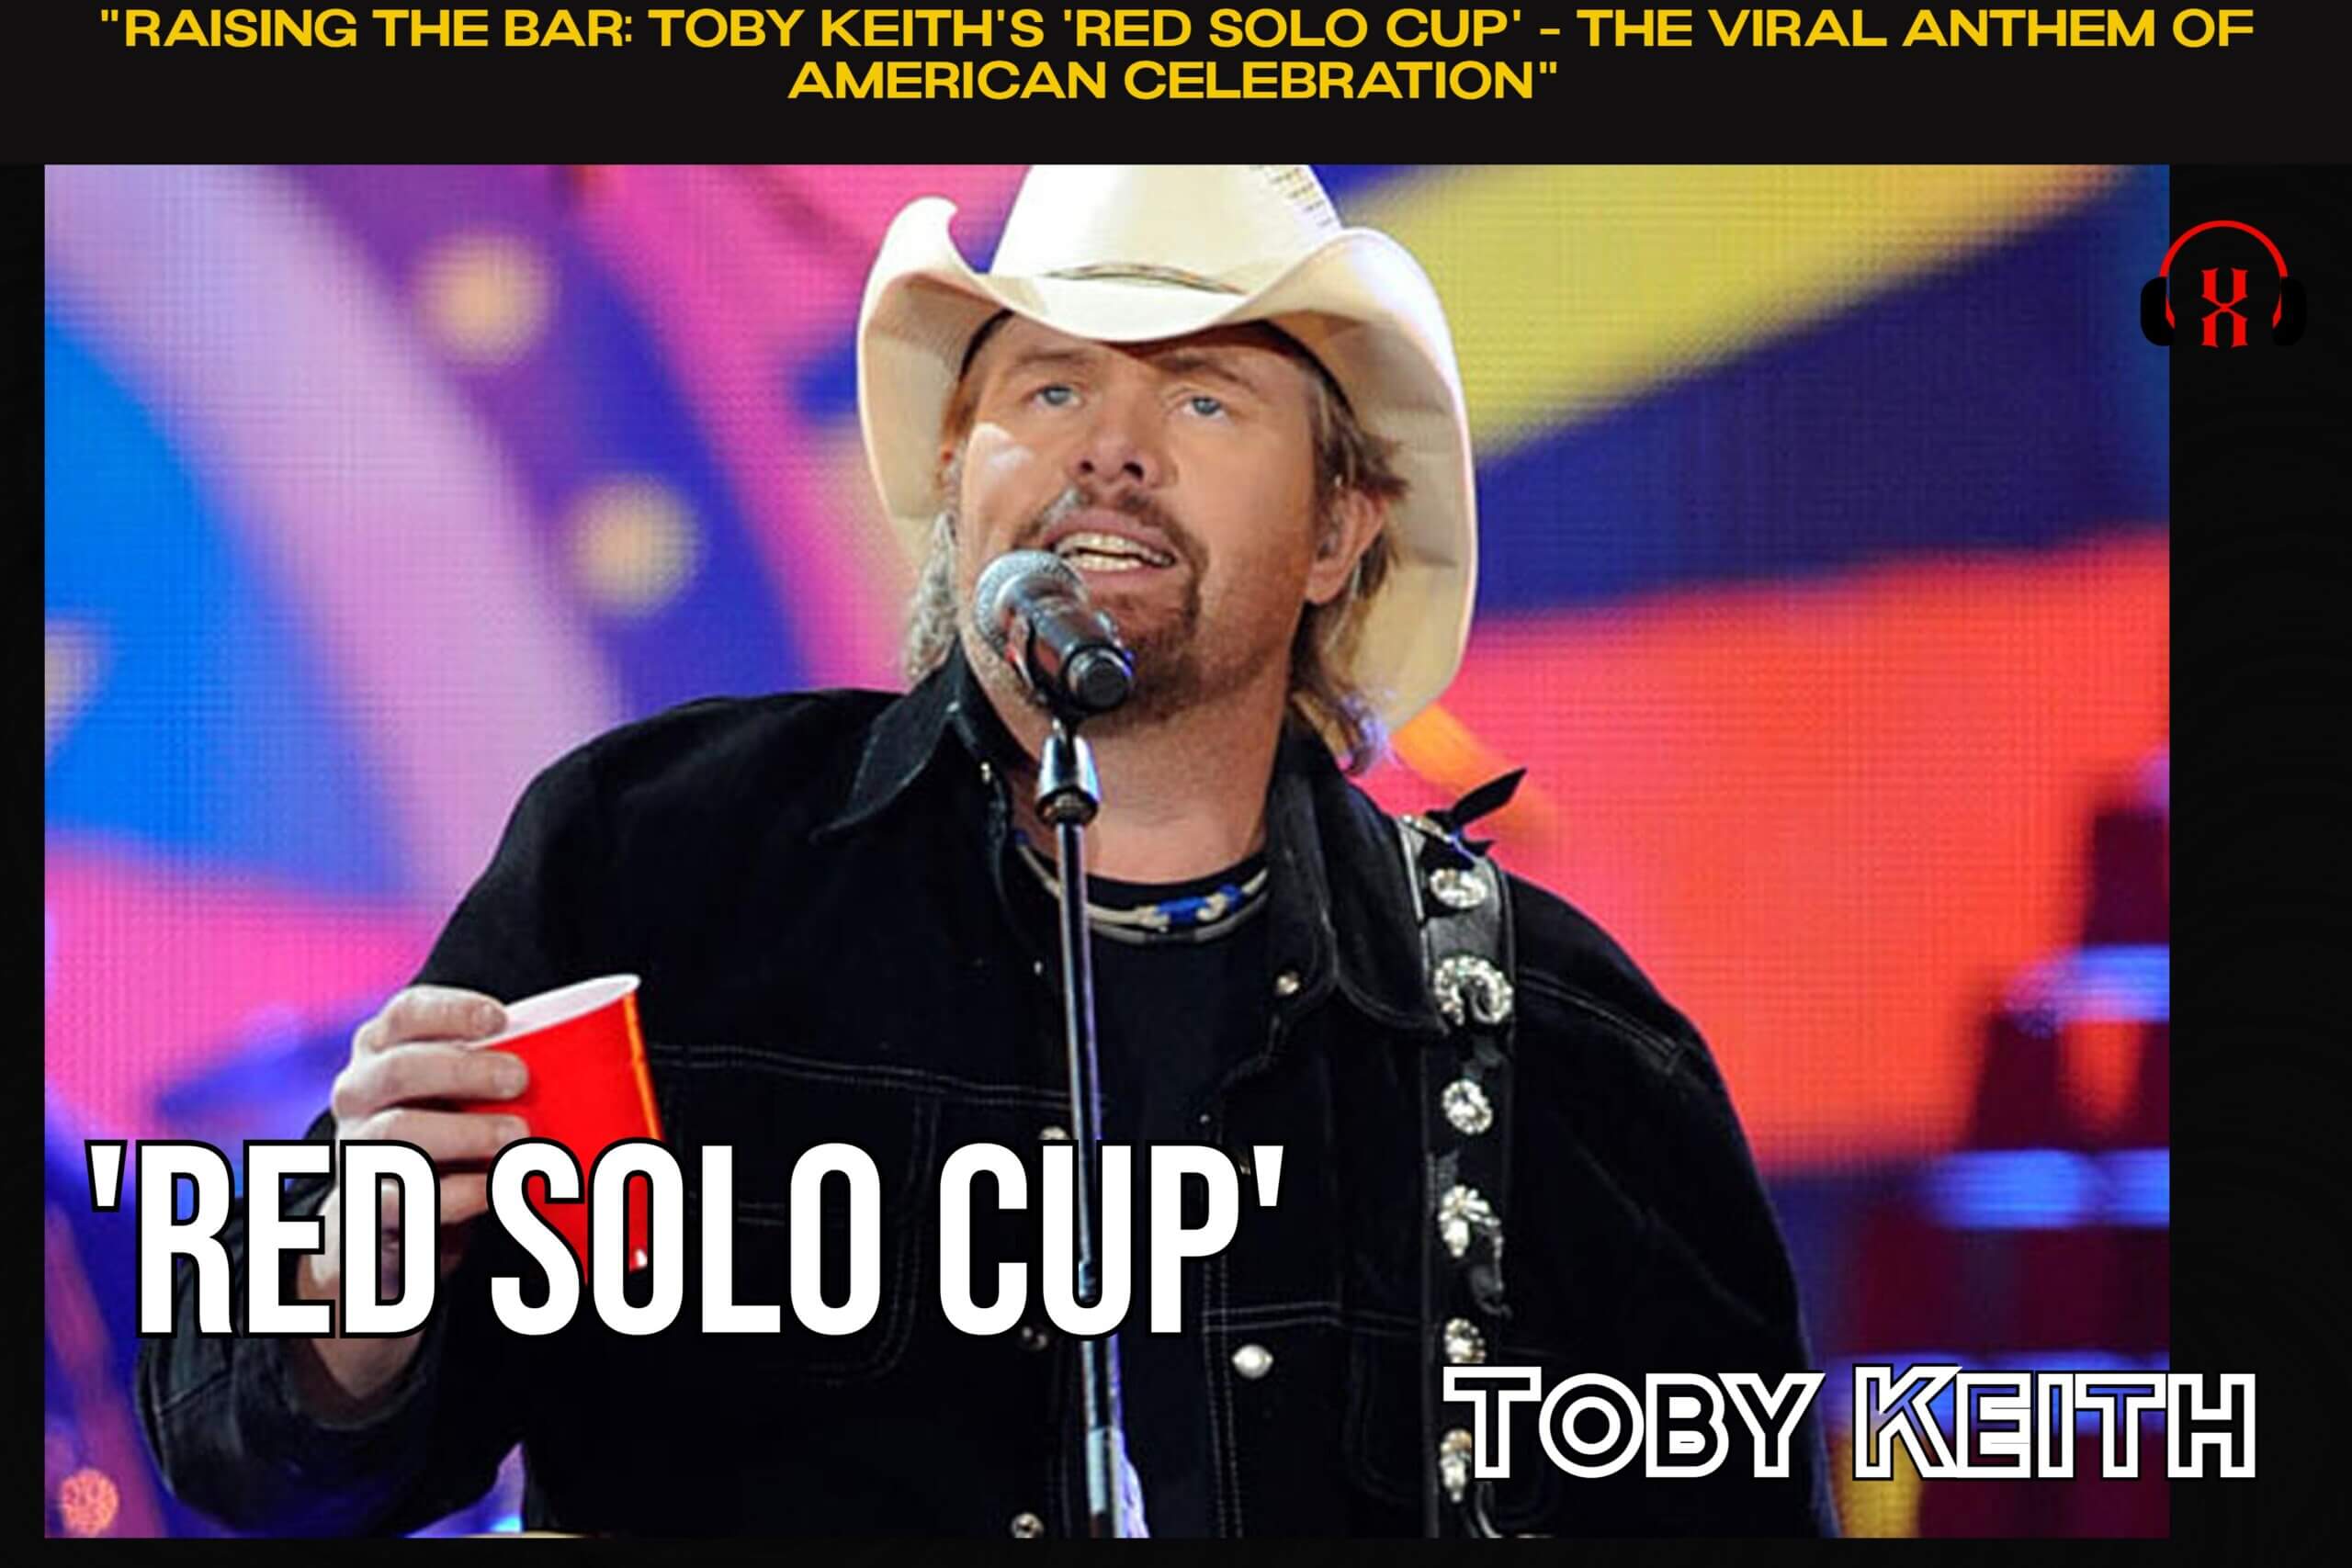 "Raising the Bar: Toby Keith's 'Red Solo Cup' - The Viral Anthem of American Celebration"